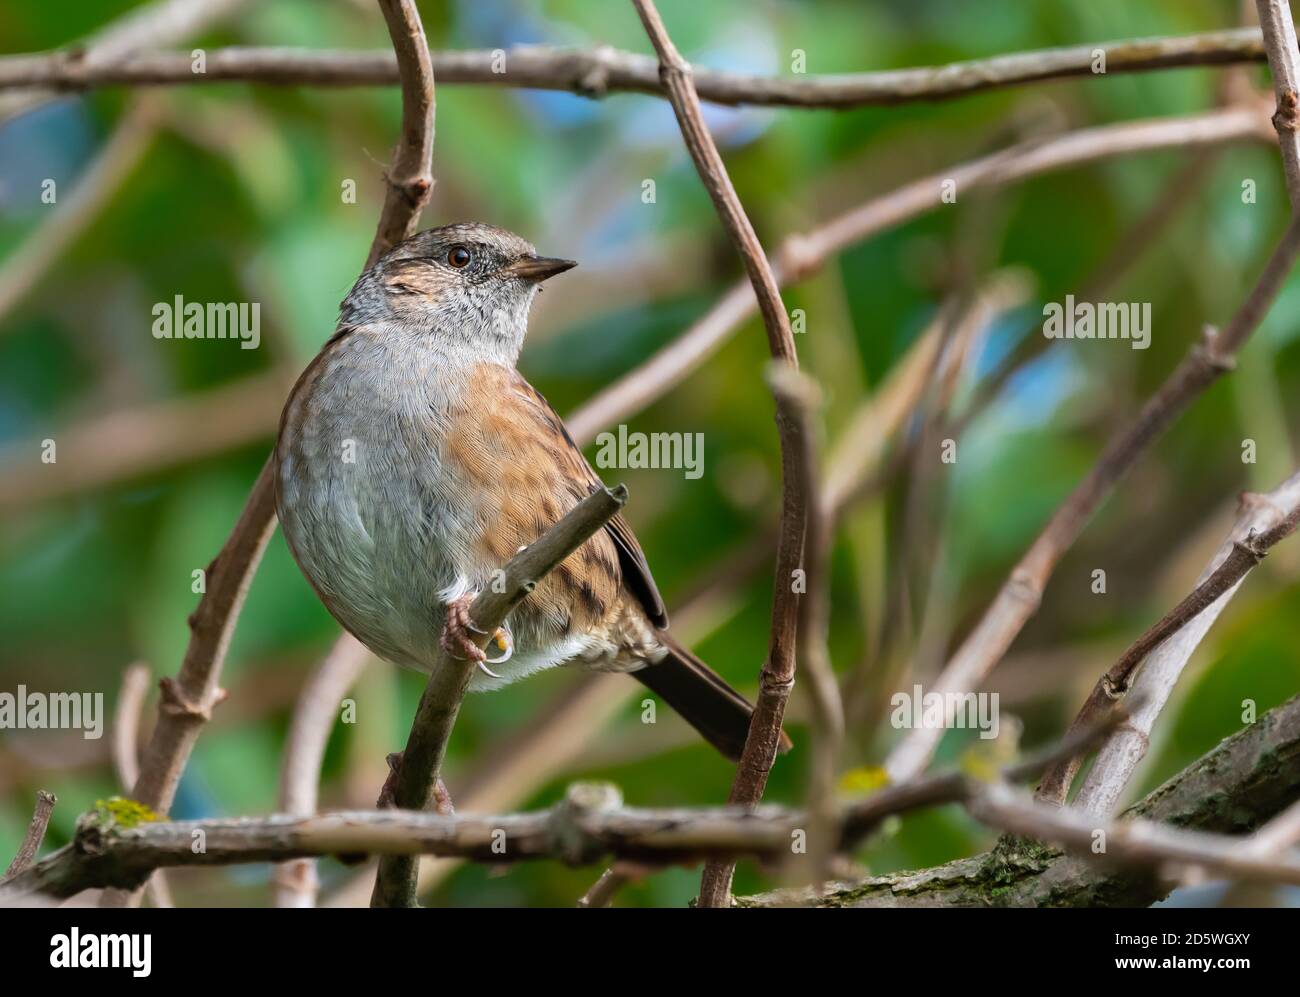 Adult Dunnock bird (Prunella modularis), a small passerine or perching bird, perched on a tree branch in Autumn in West Sussex, England, UK. Stock Photo